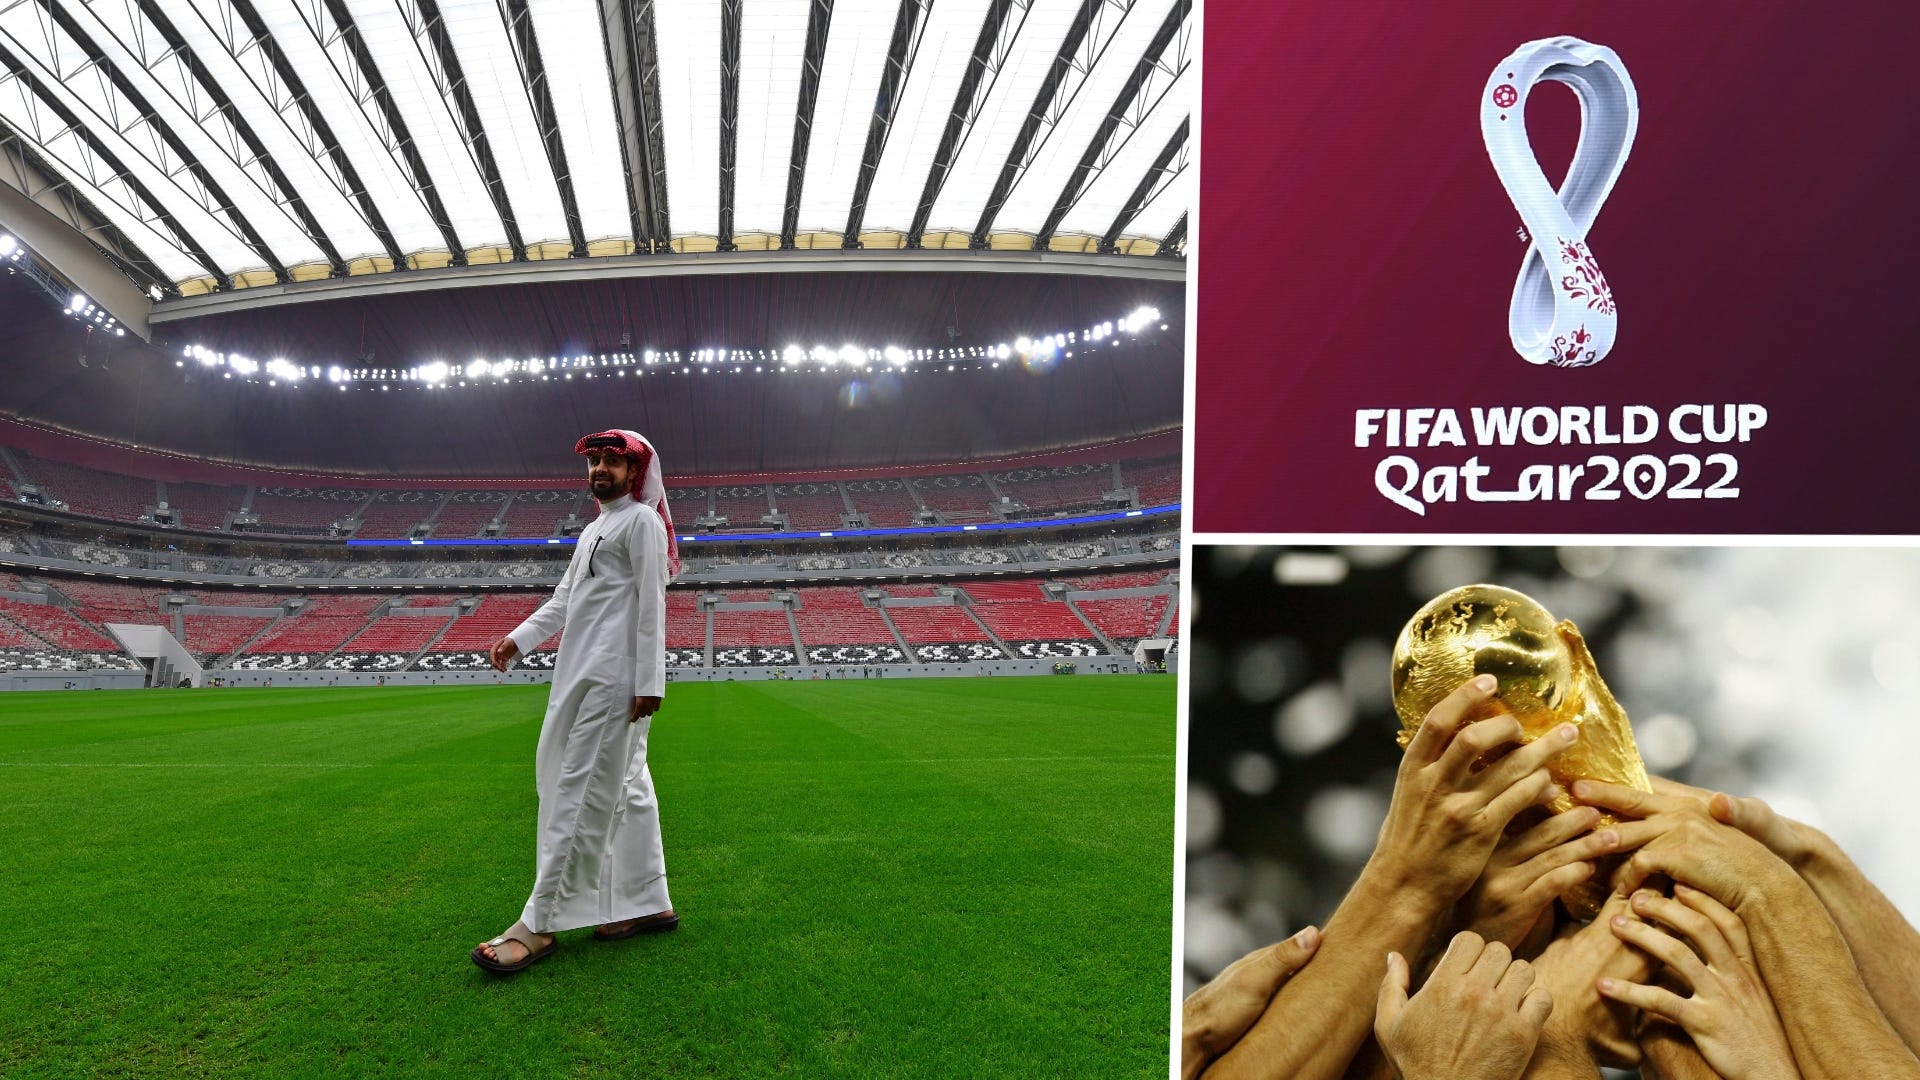 2022 World Cup Qatar Match schedule and timing a big win-win for Indian fans Goal